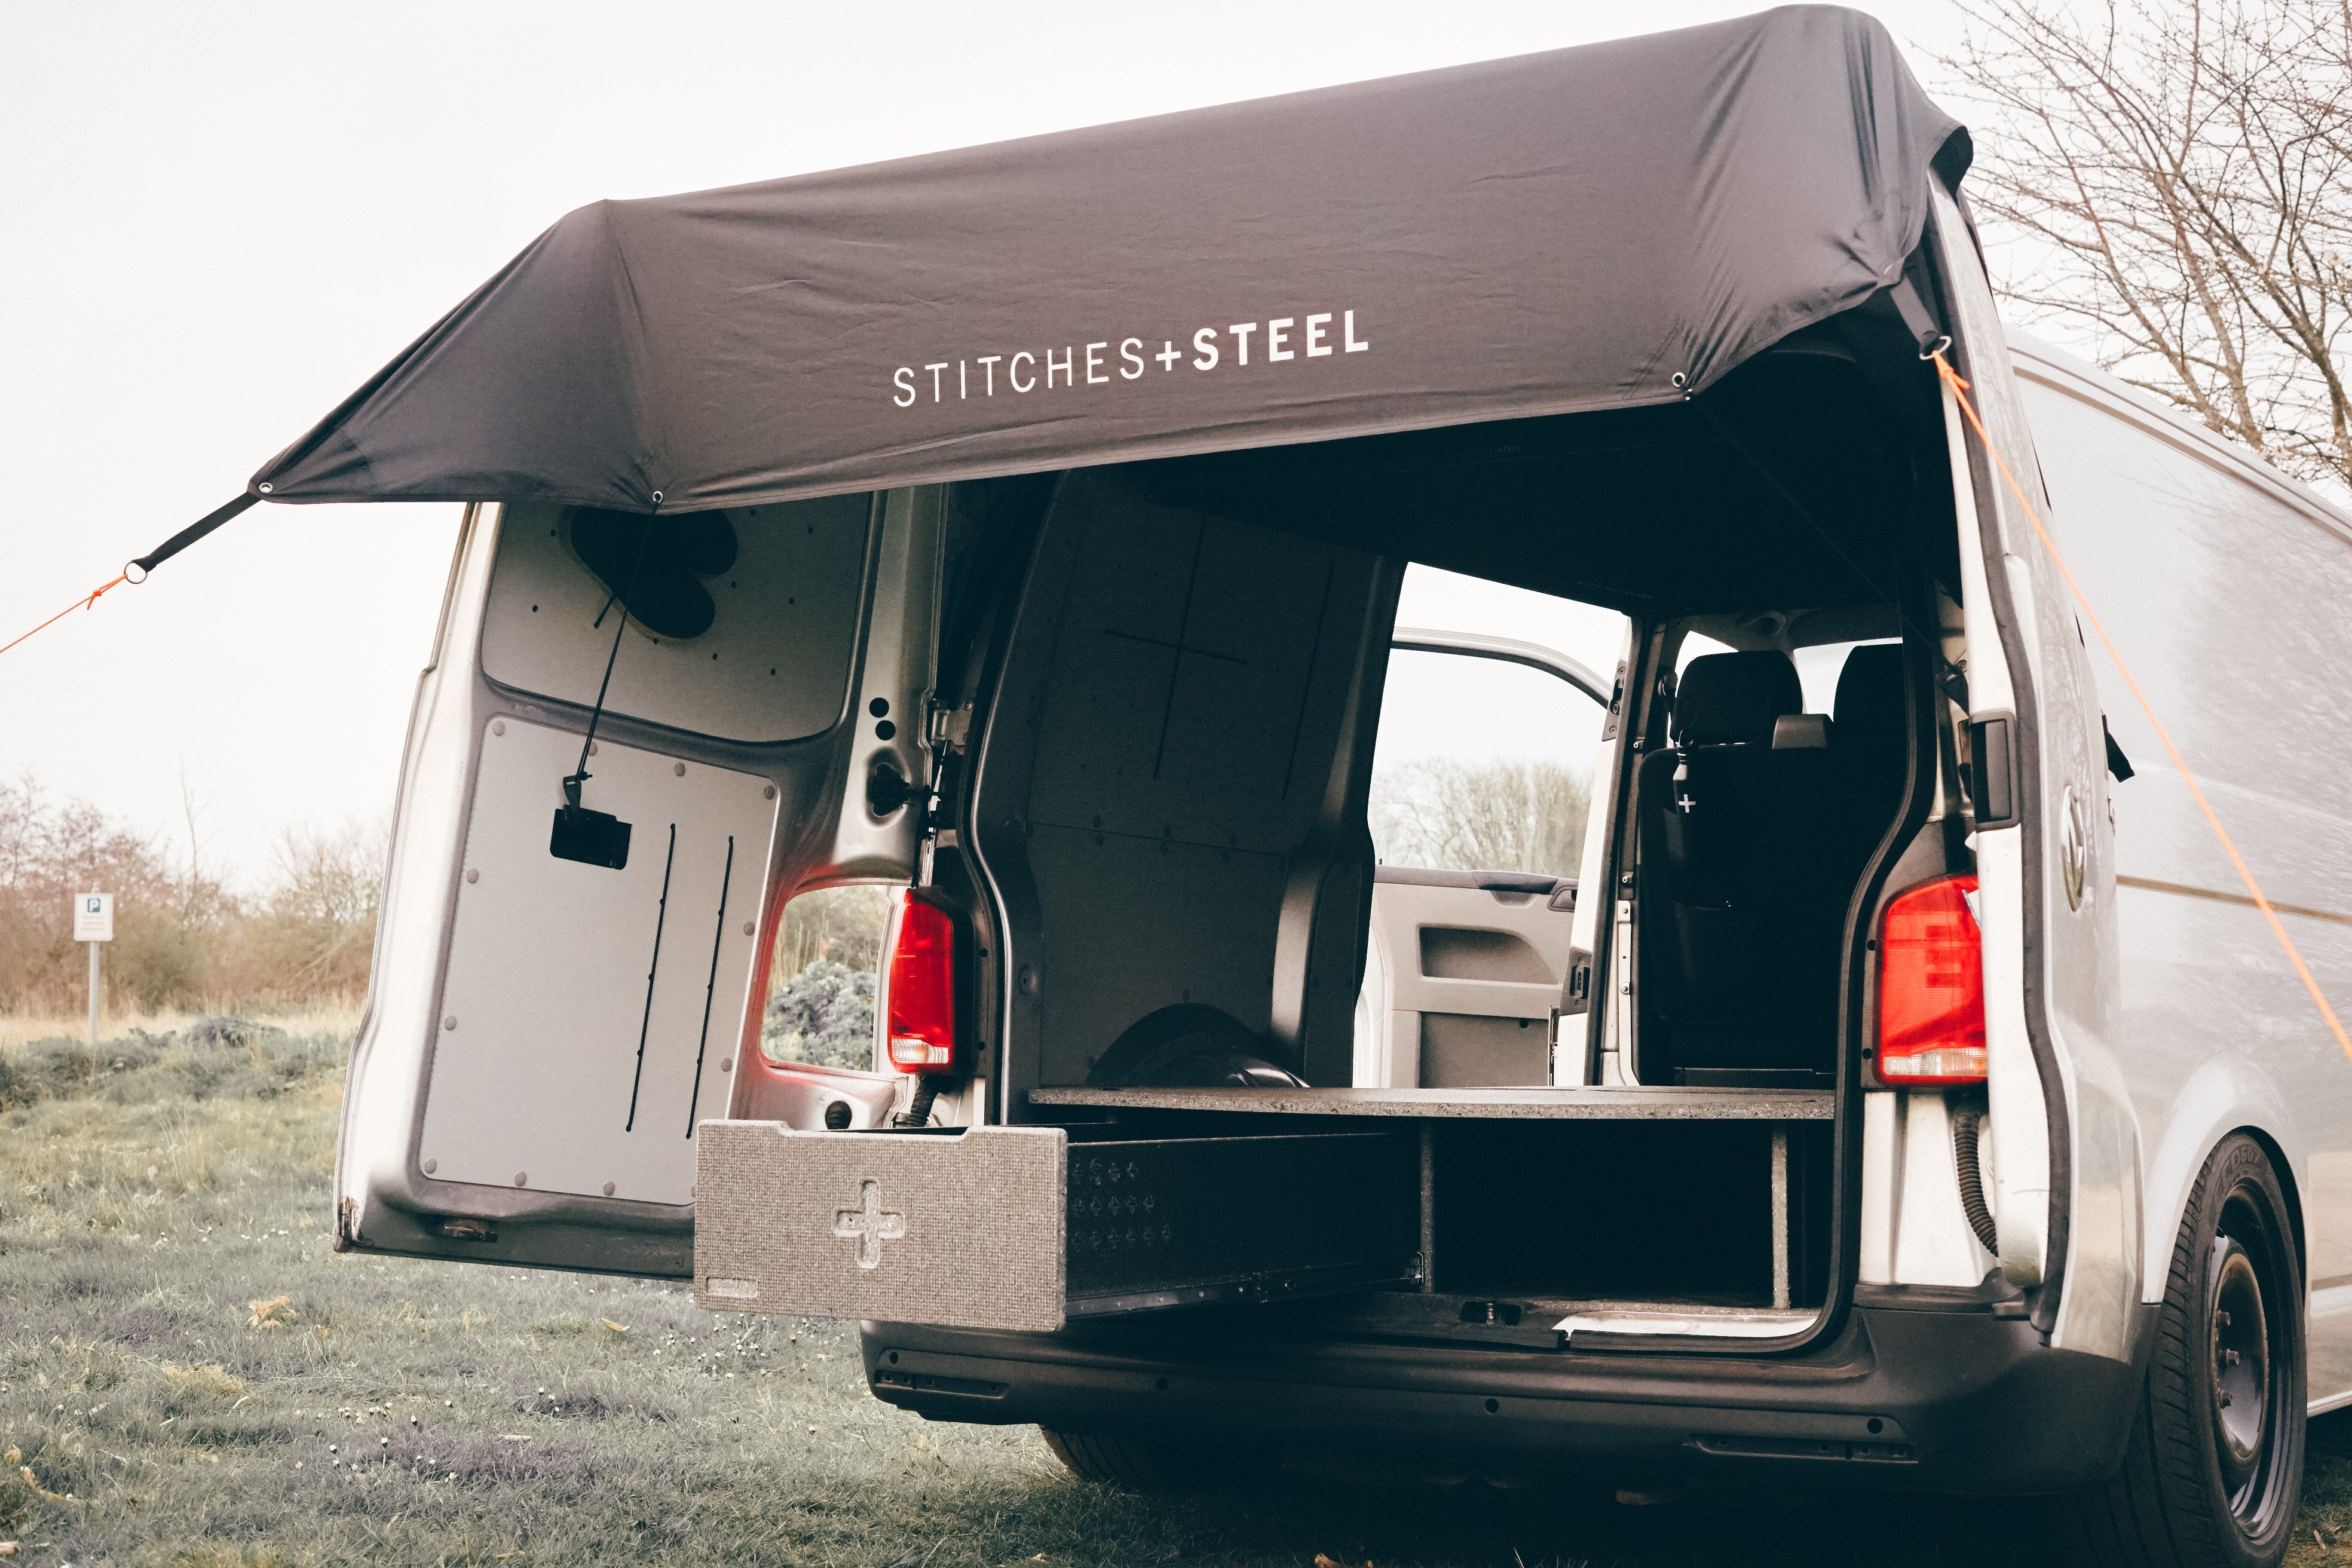 Stitches & Steel Van Awning One